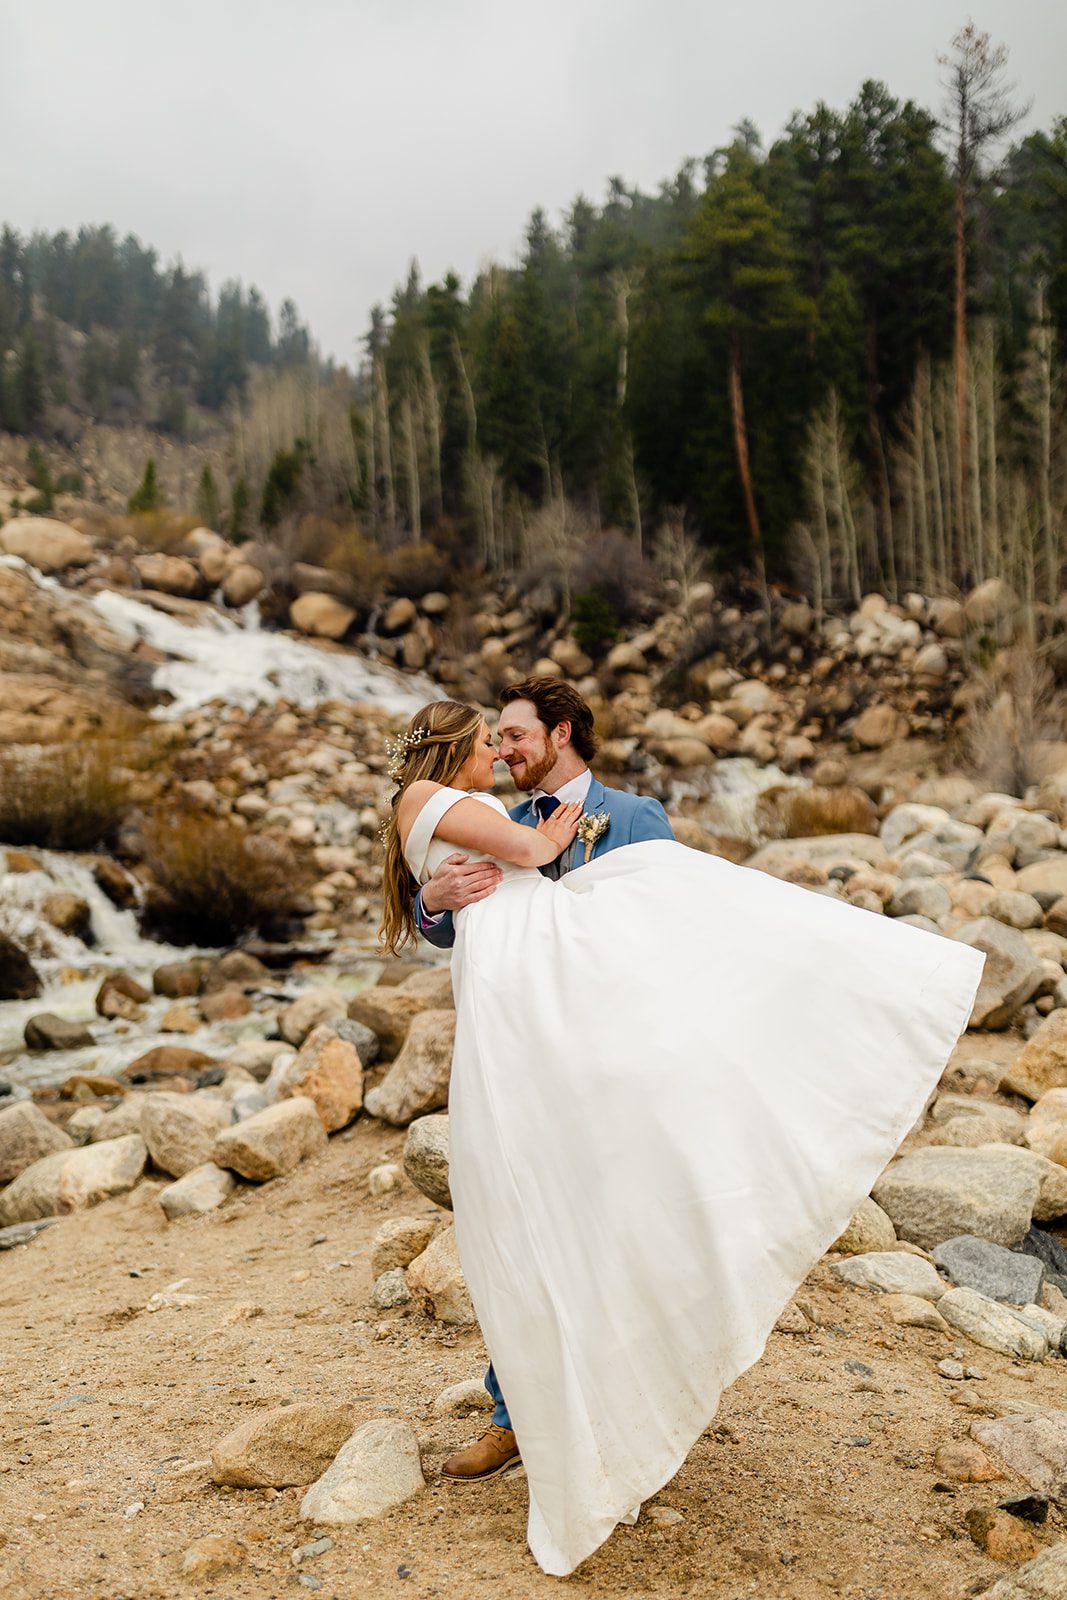 Groom picking up bride, Colorado Elopement photos at at Alluvial Fan Bridge in Rocky Mountain National Park